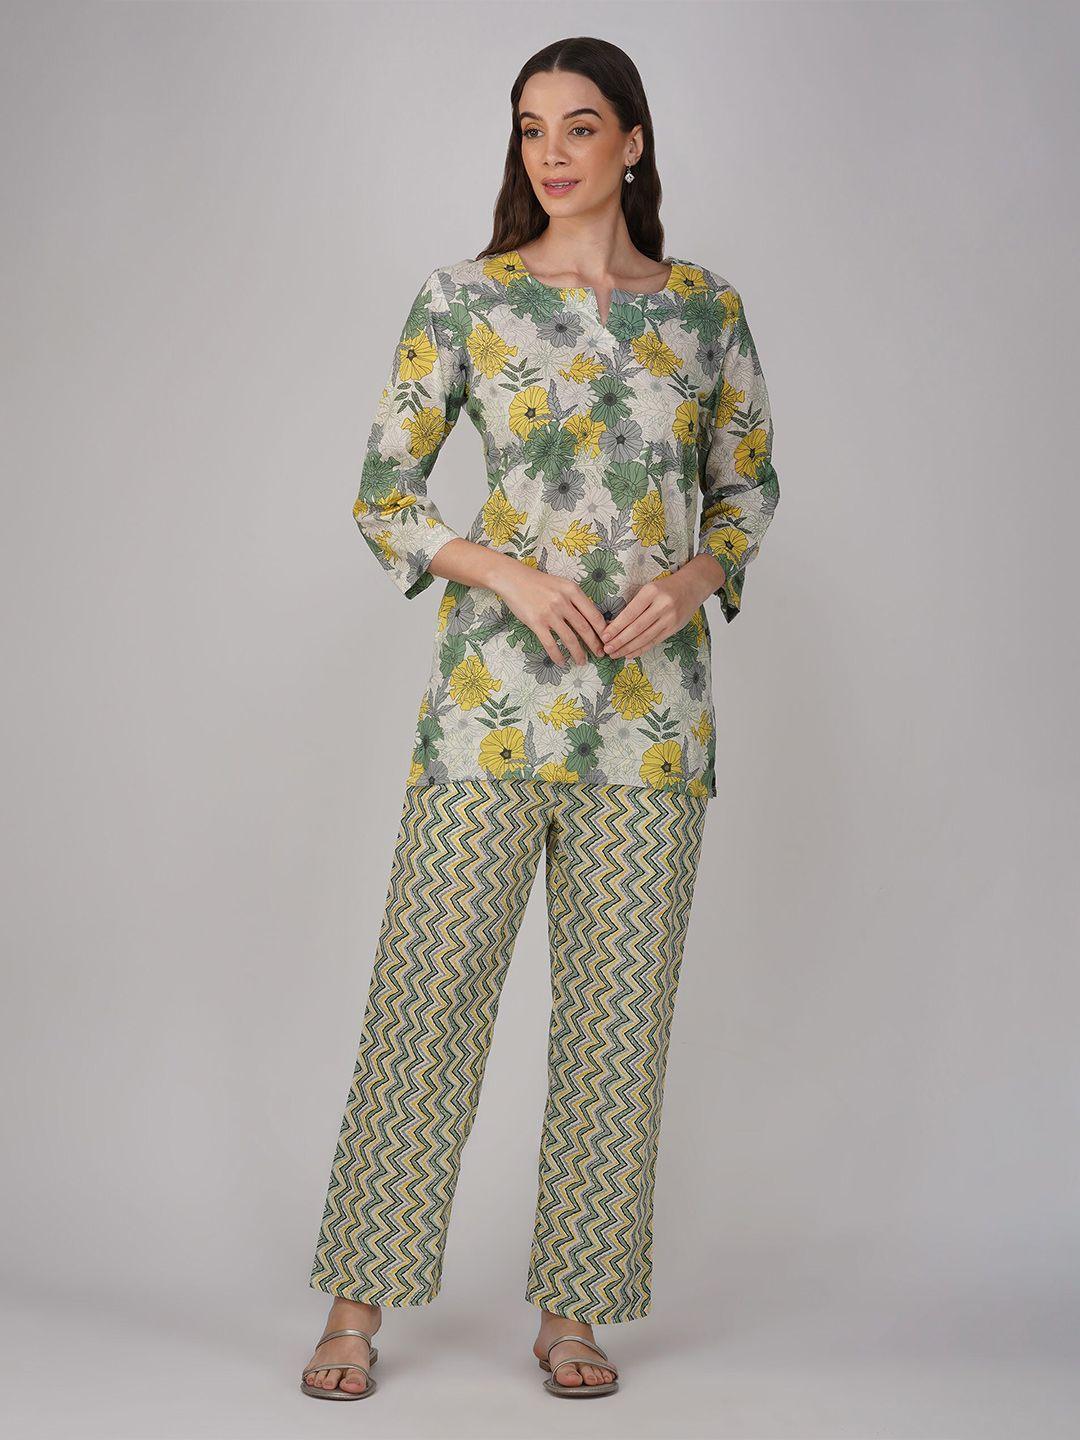 sparsa floral printed pure cotton top with trousers